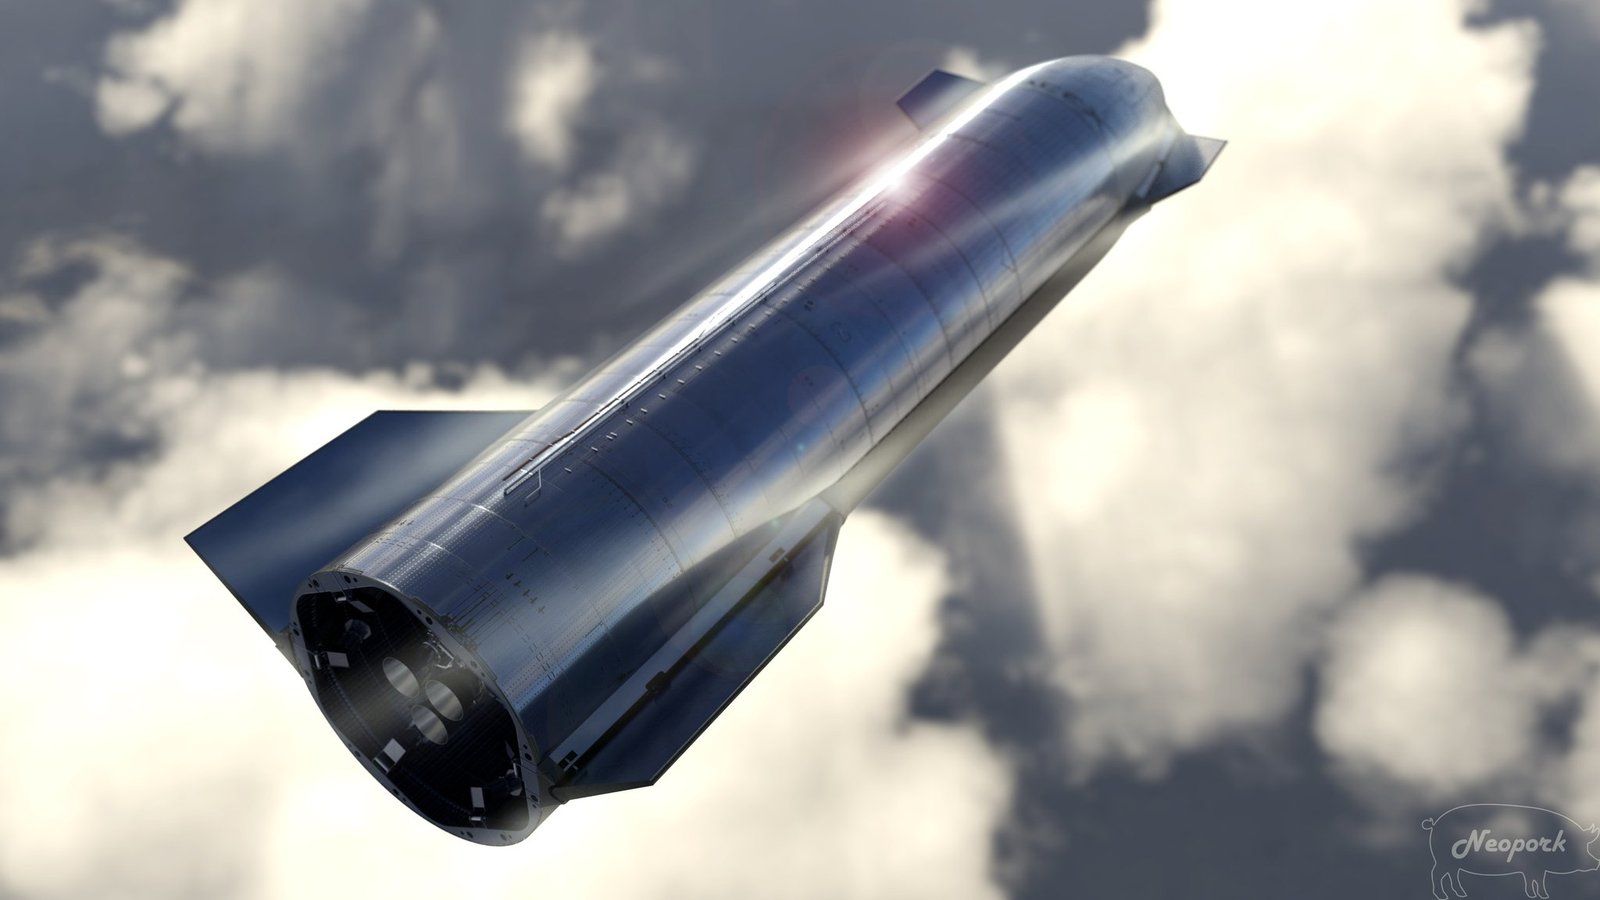 Elon Musk says SpaceX could launch Starship prototype 000 ft